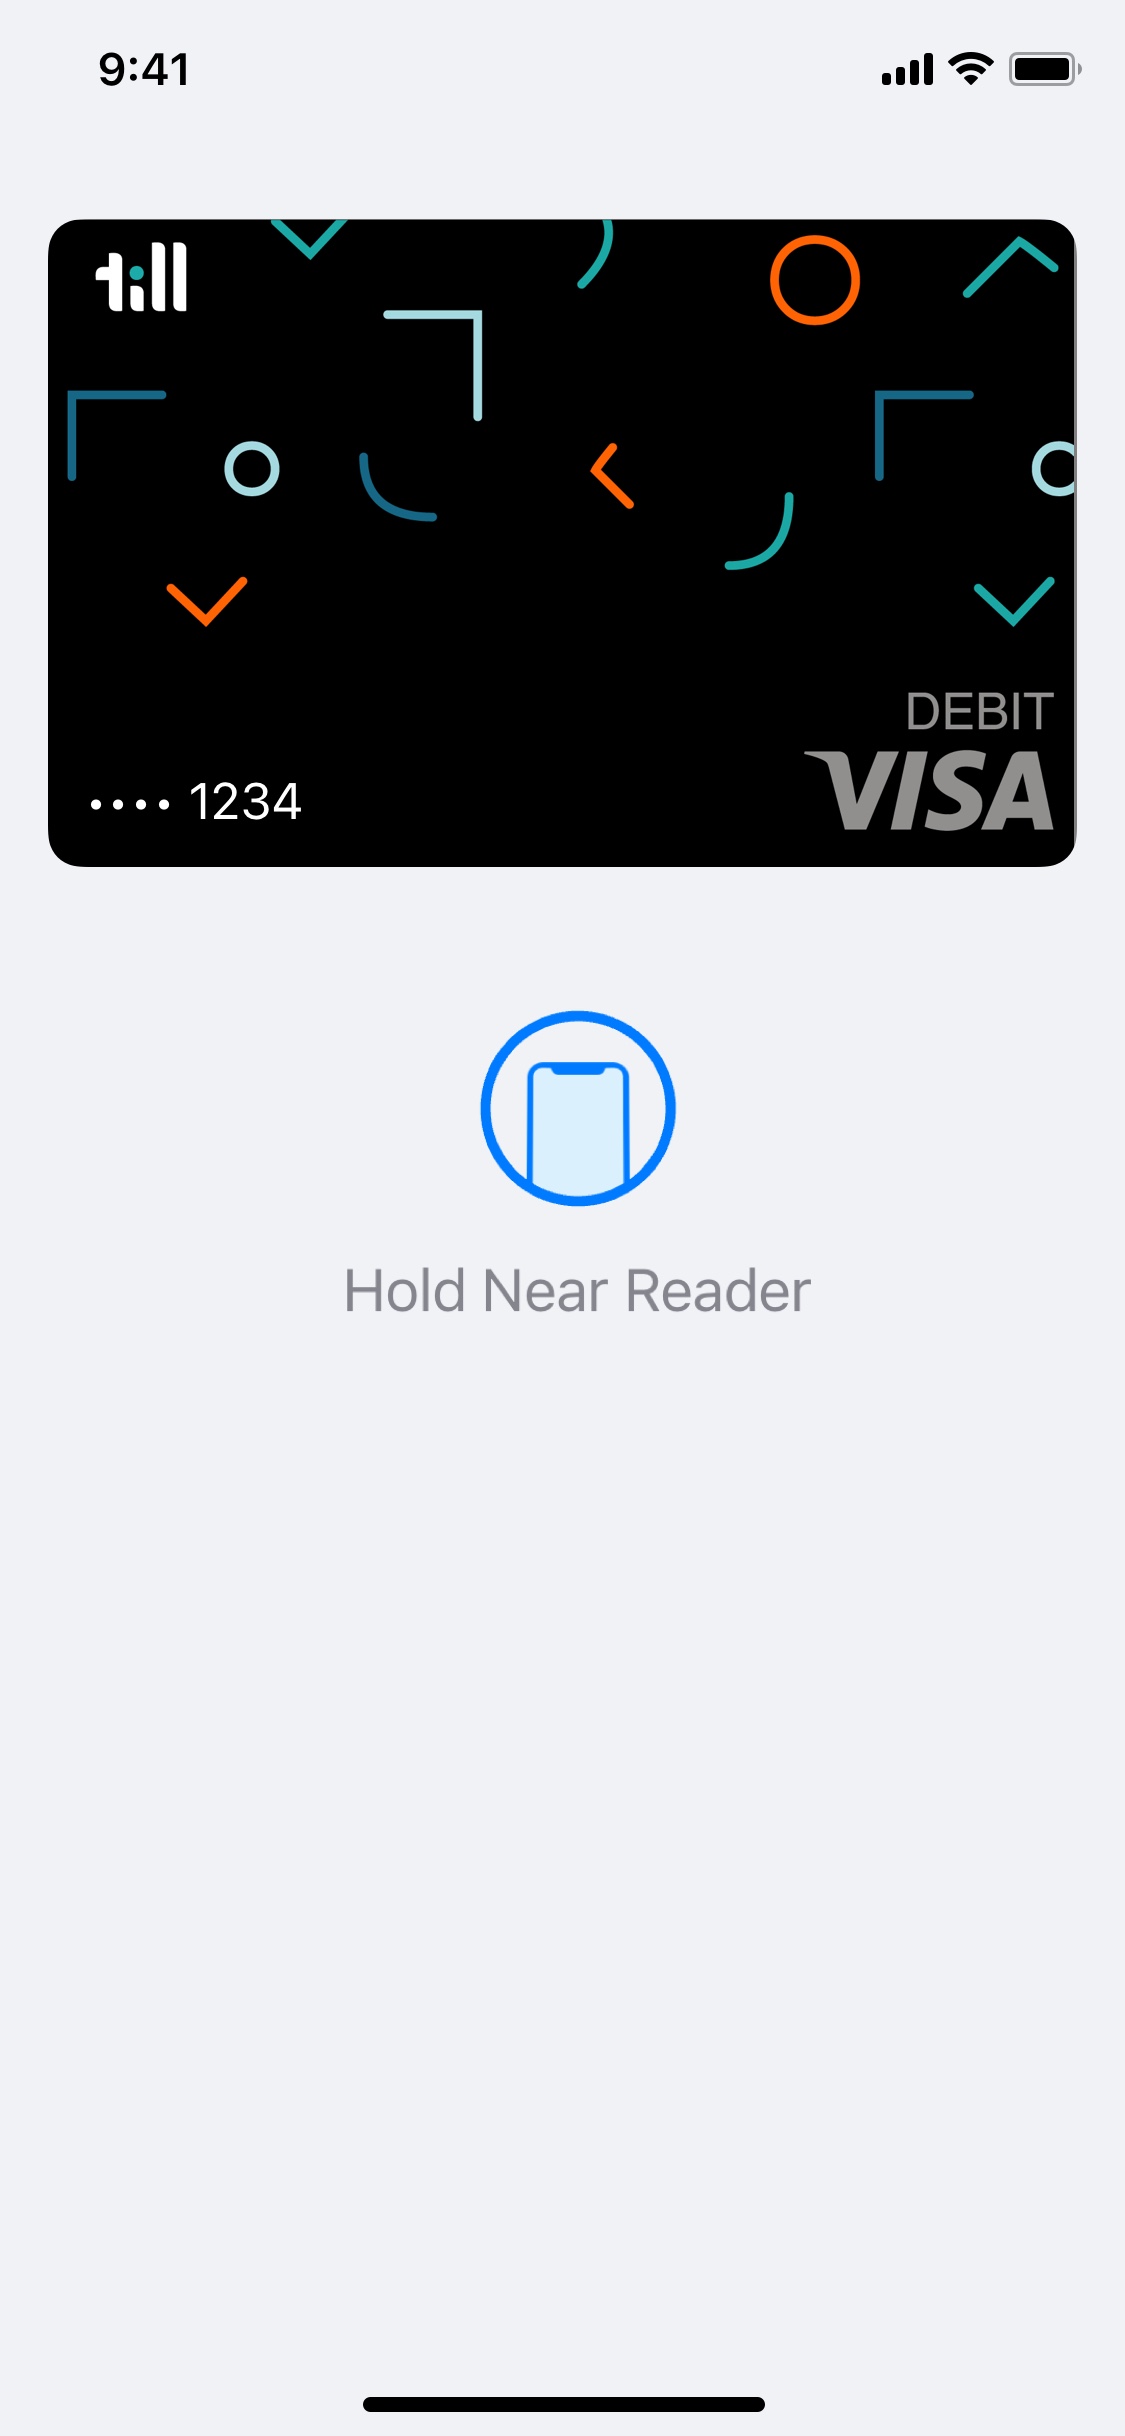 Smartphone showing the Till card added as a virtual payment card